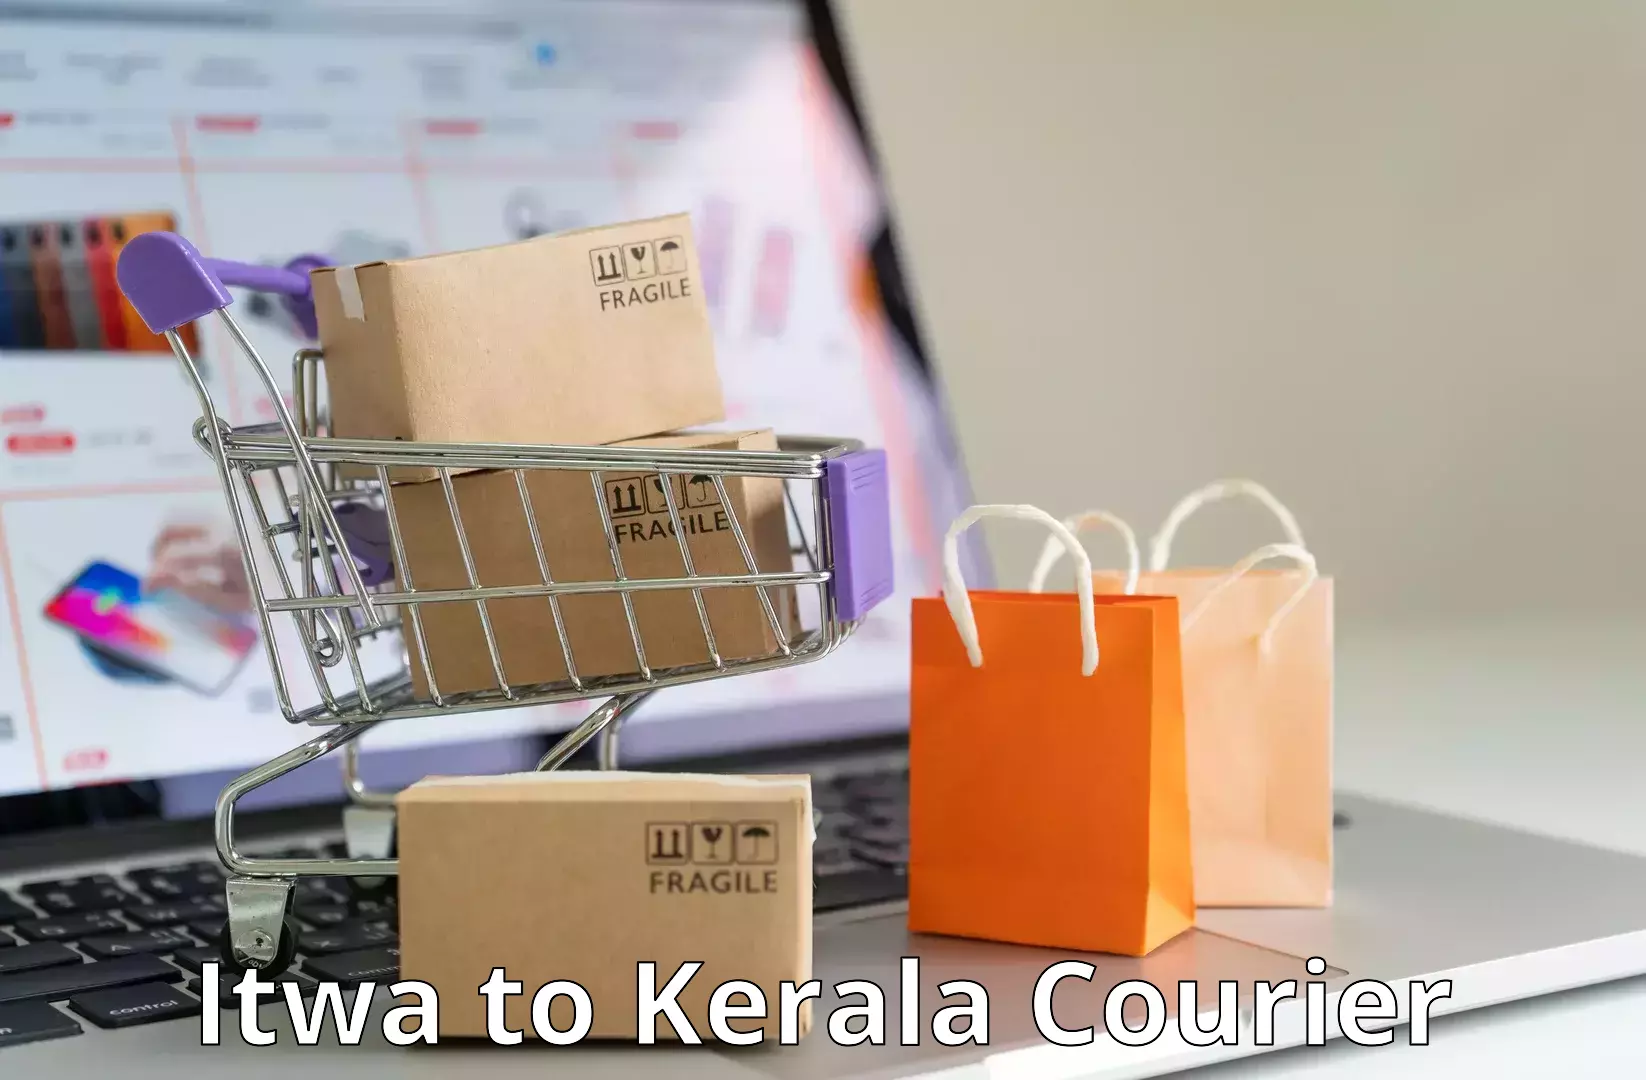 Next-generation courier services Itwa to Sankaramangalam